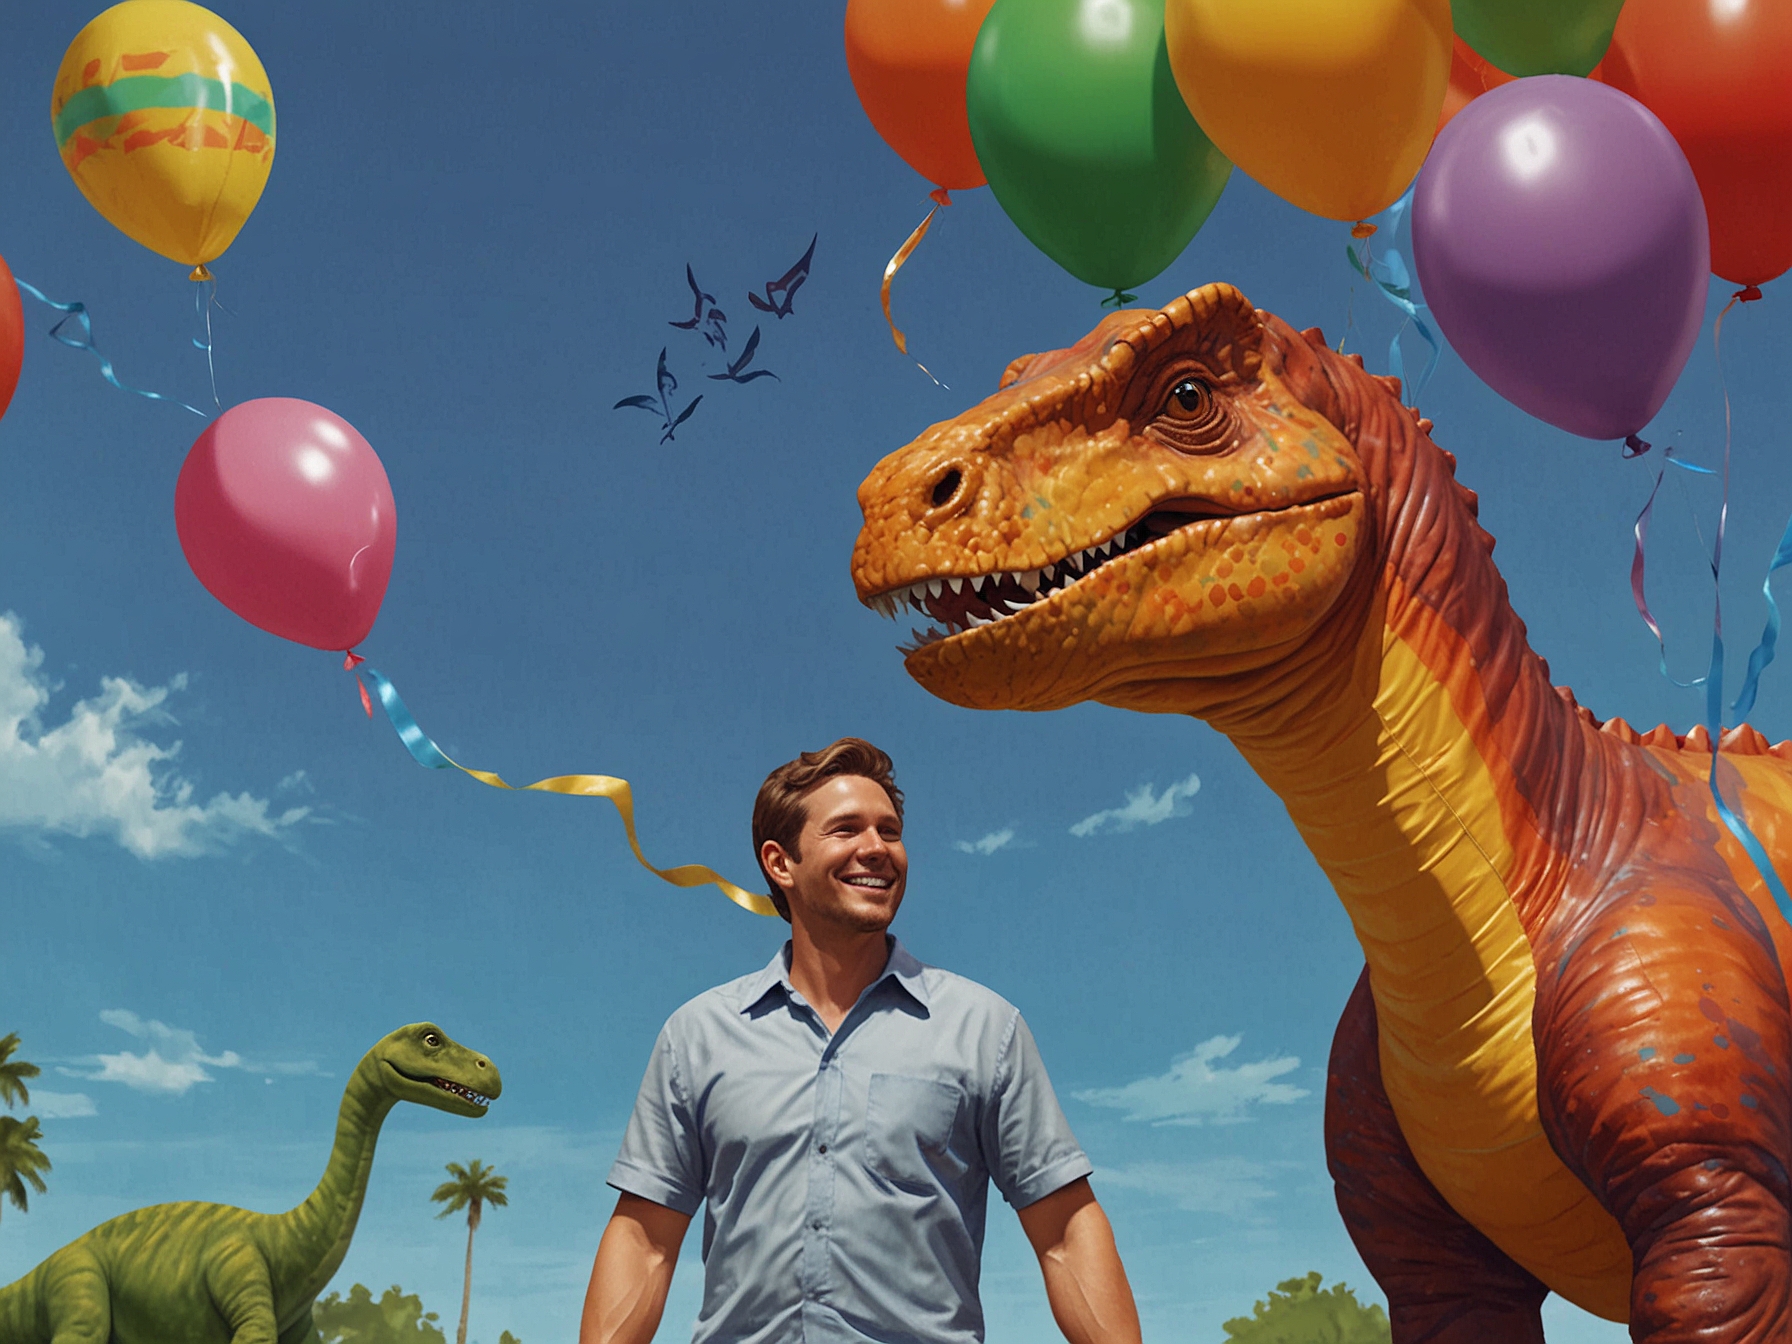 Crew Gaines grins ear to ear as he holds a colorful kite against a clear blue sky in the backyard, adorned with life-size dinosaur decorations and vibrant balloons.